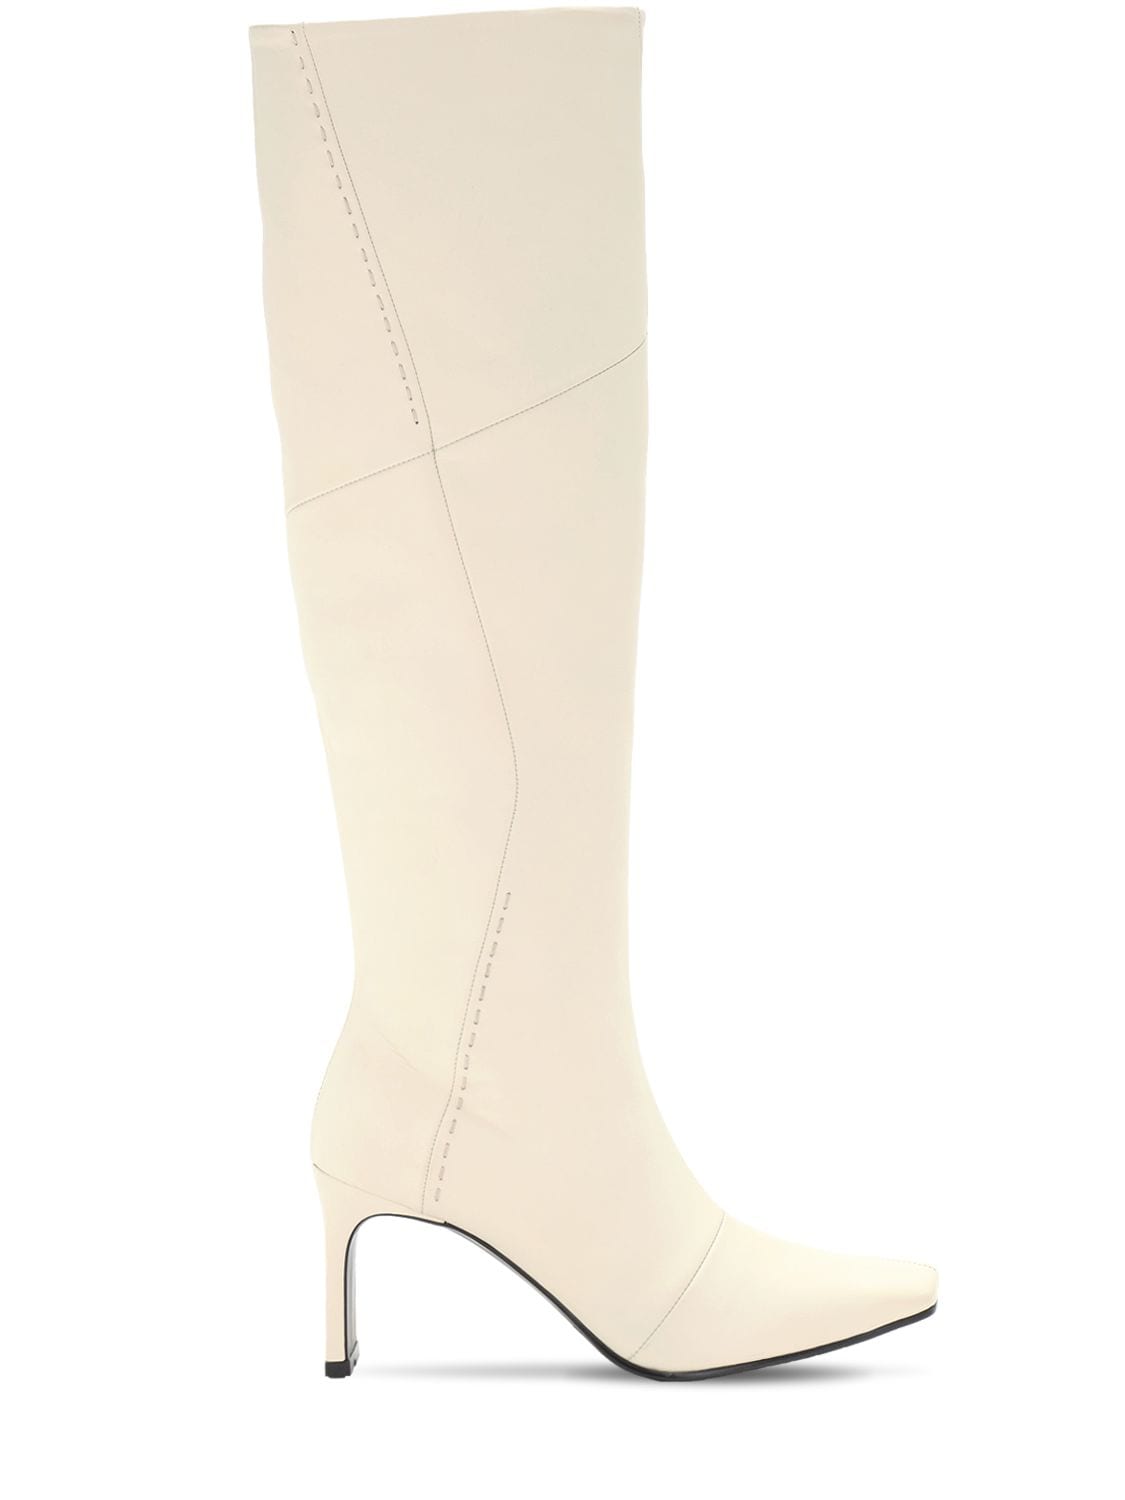 Reike Nen 80mm Stitched Leather Tall Boots In Cream